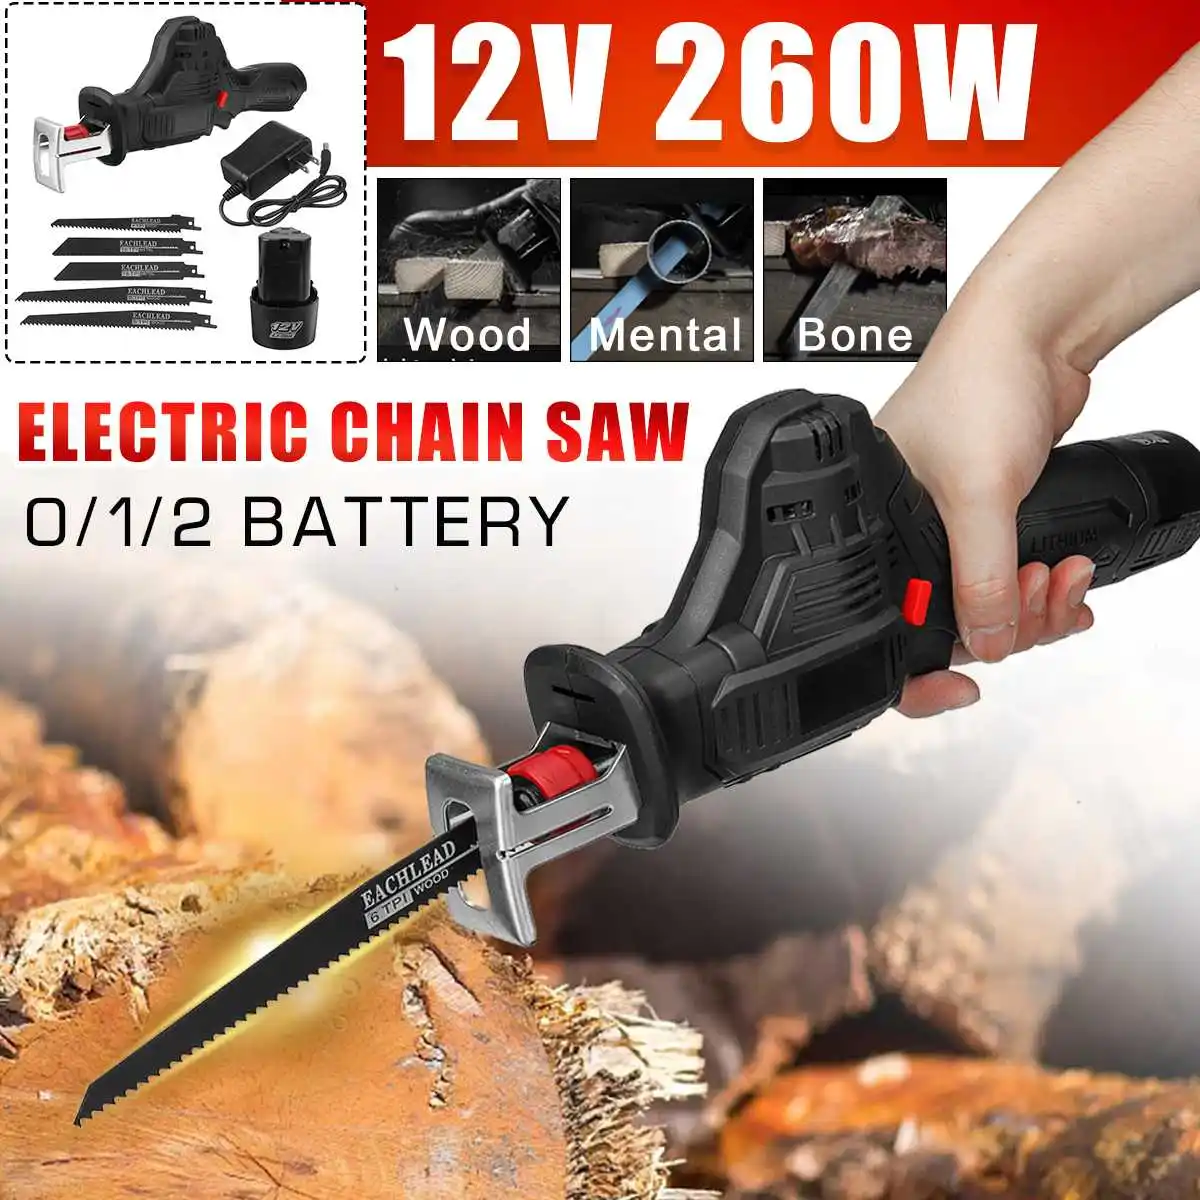 

88V Cordless Reciprocating Saw + 5 Saw Blades Metal Cutting Wood Tool Portable Woodworking Cutters with 1/2 Batterys Charge